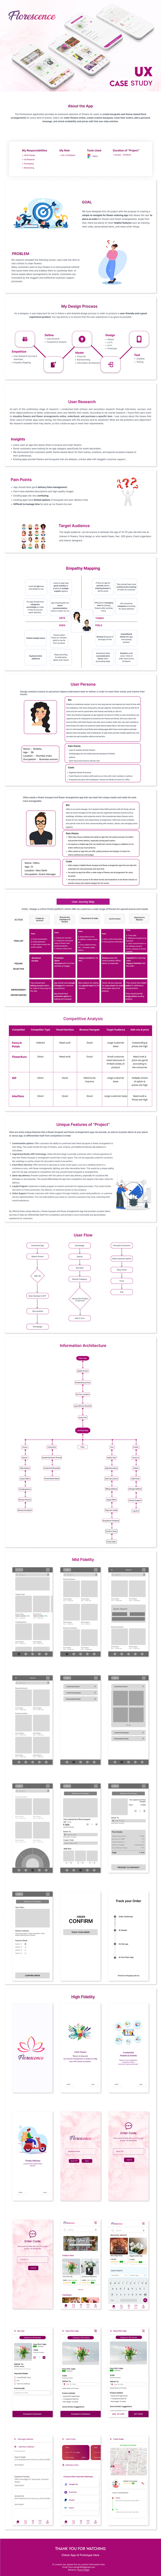 UX design Figma user experience app design UI/UX Mobile app wireframes ux UX Research user interface